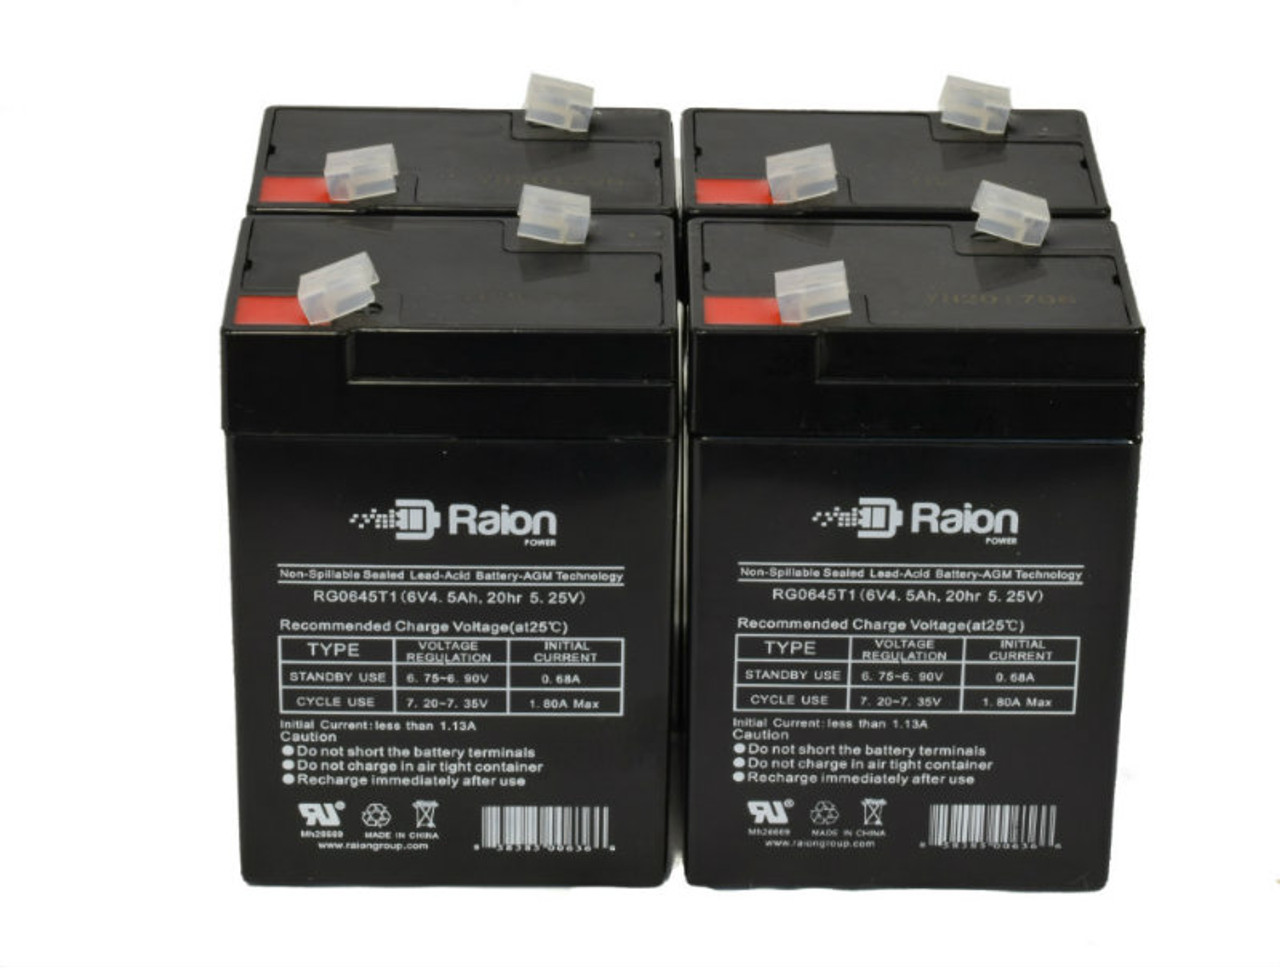 Raion Power 6V 4.5Ah Replacement Emergency Light Battery for Hubbell 12-255 - 4 Pack